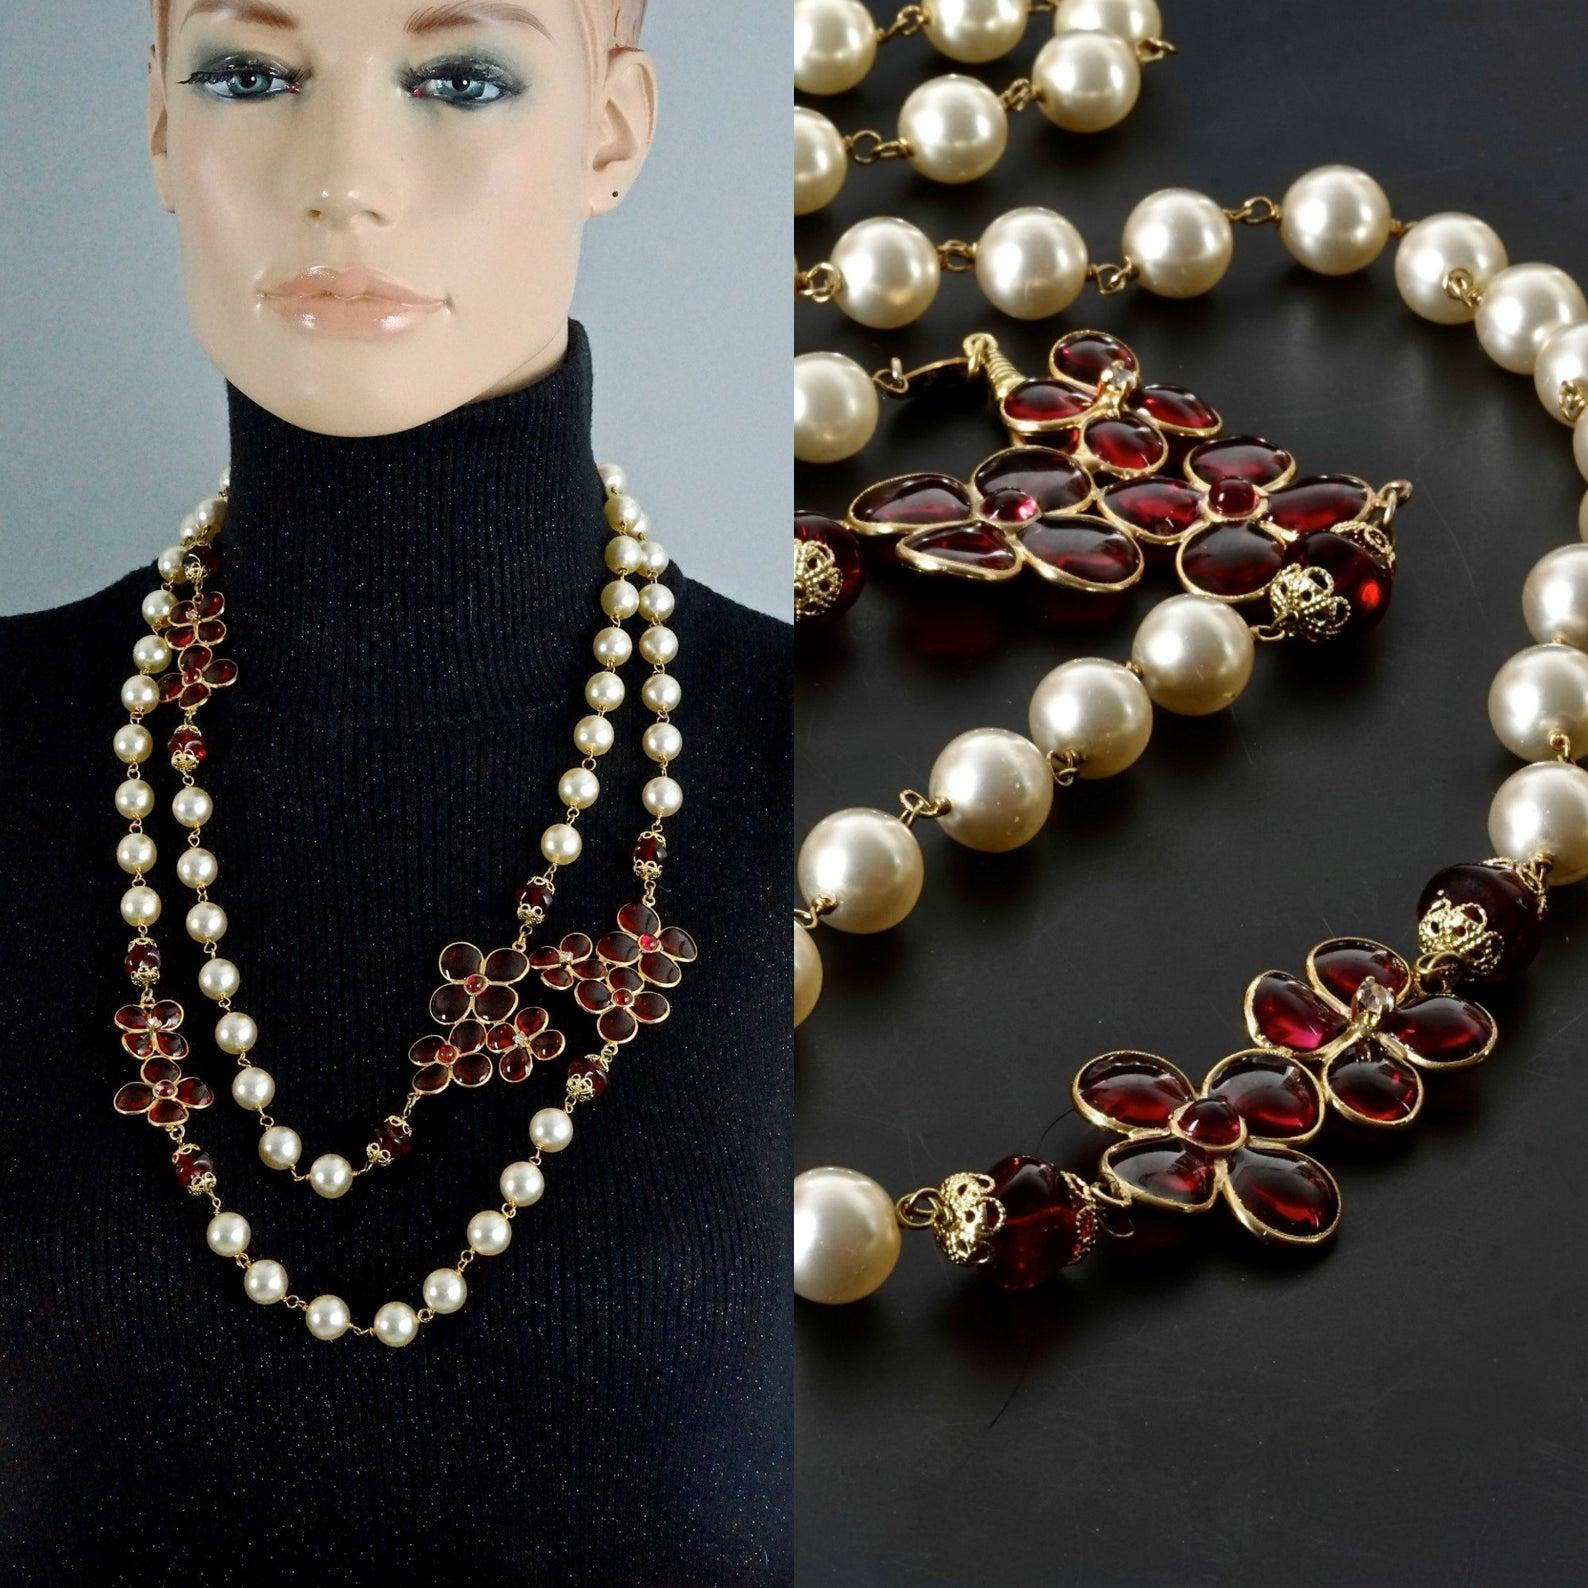 Features:
- 100% Authentic CHANEL by MAISON GRIPOIX.
- Long pearl necklace with red gripoix/ poured glass flowers.
- Gold tone hardware.
- Signed Chanel CC Made in France.
- Could be used as a long single strand necklace or double strand necklace.
-